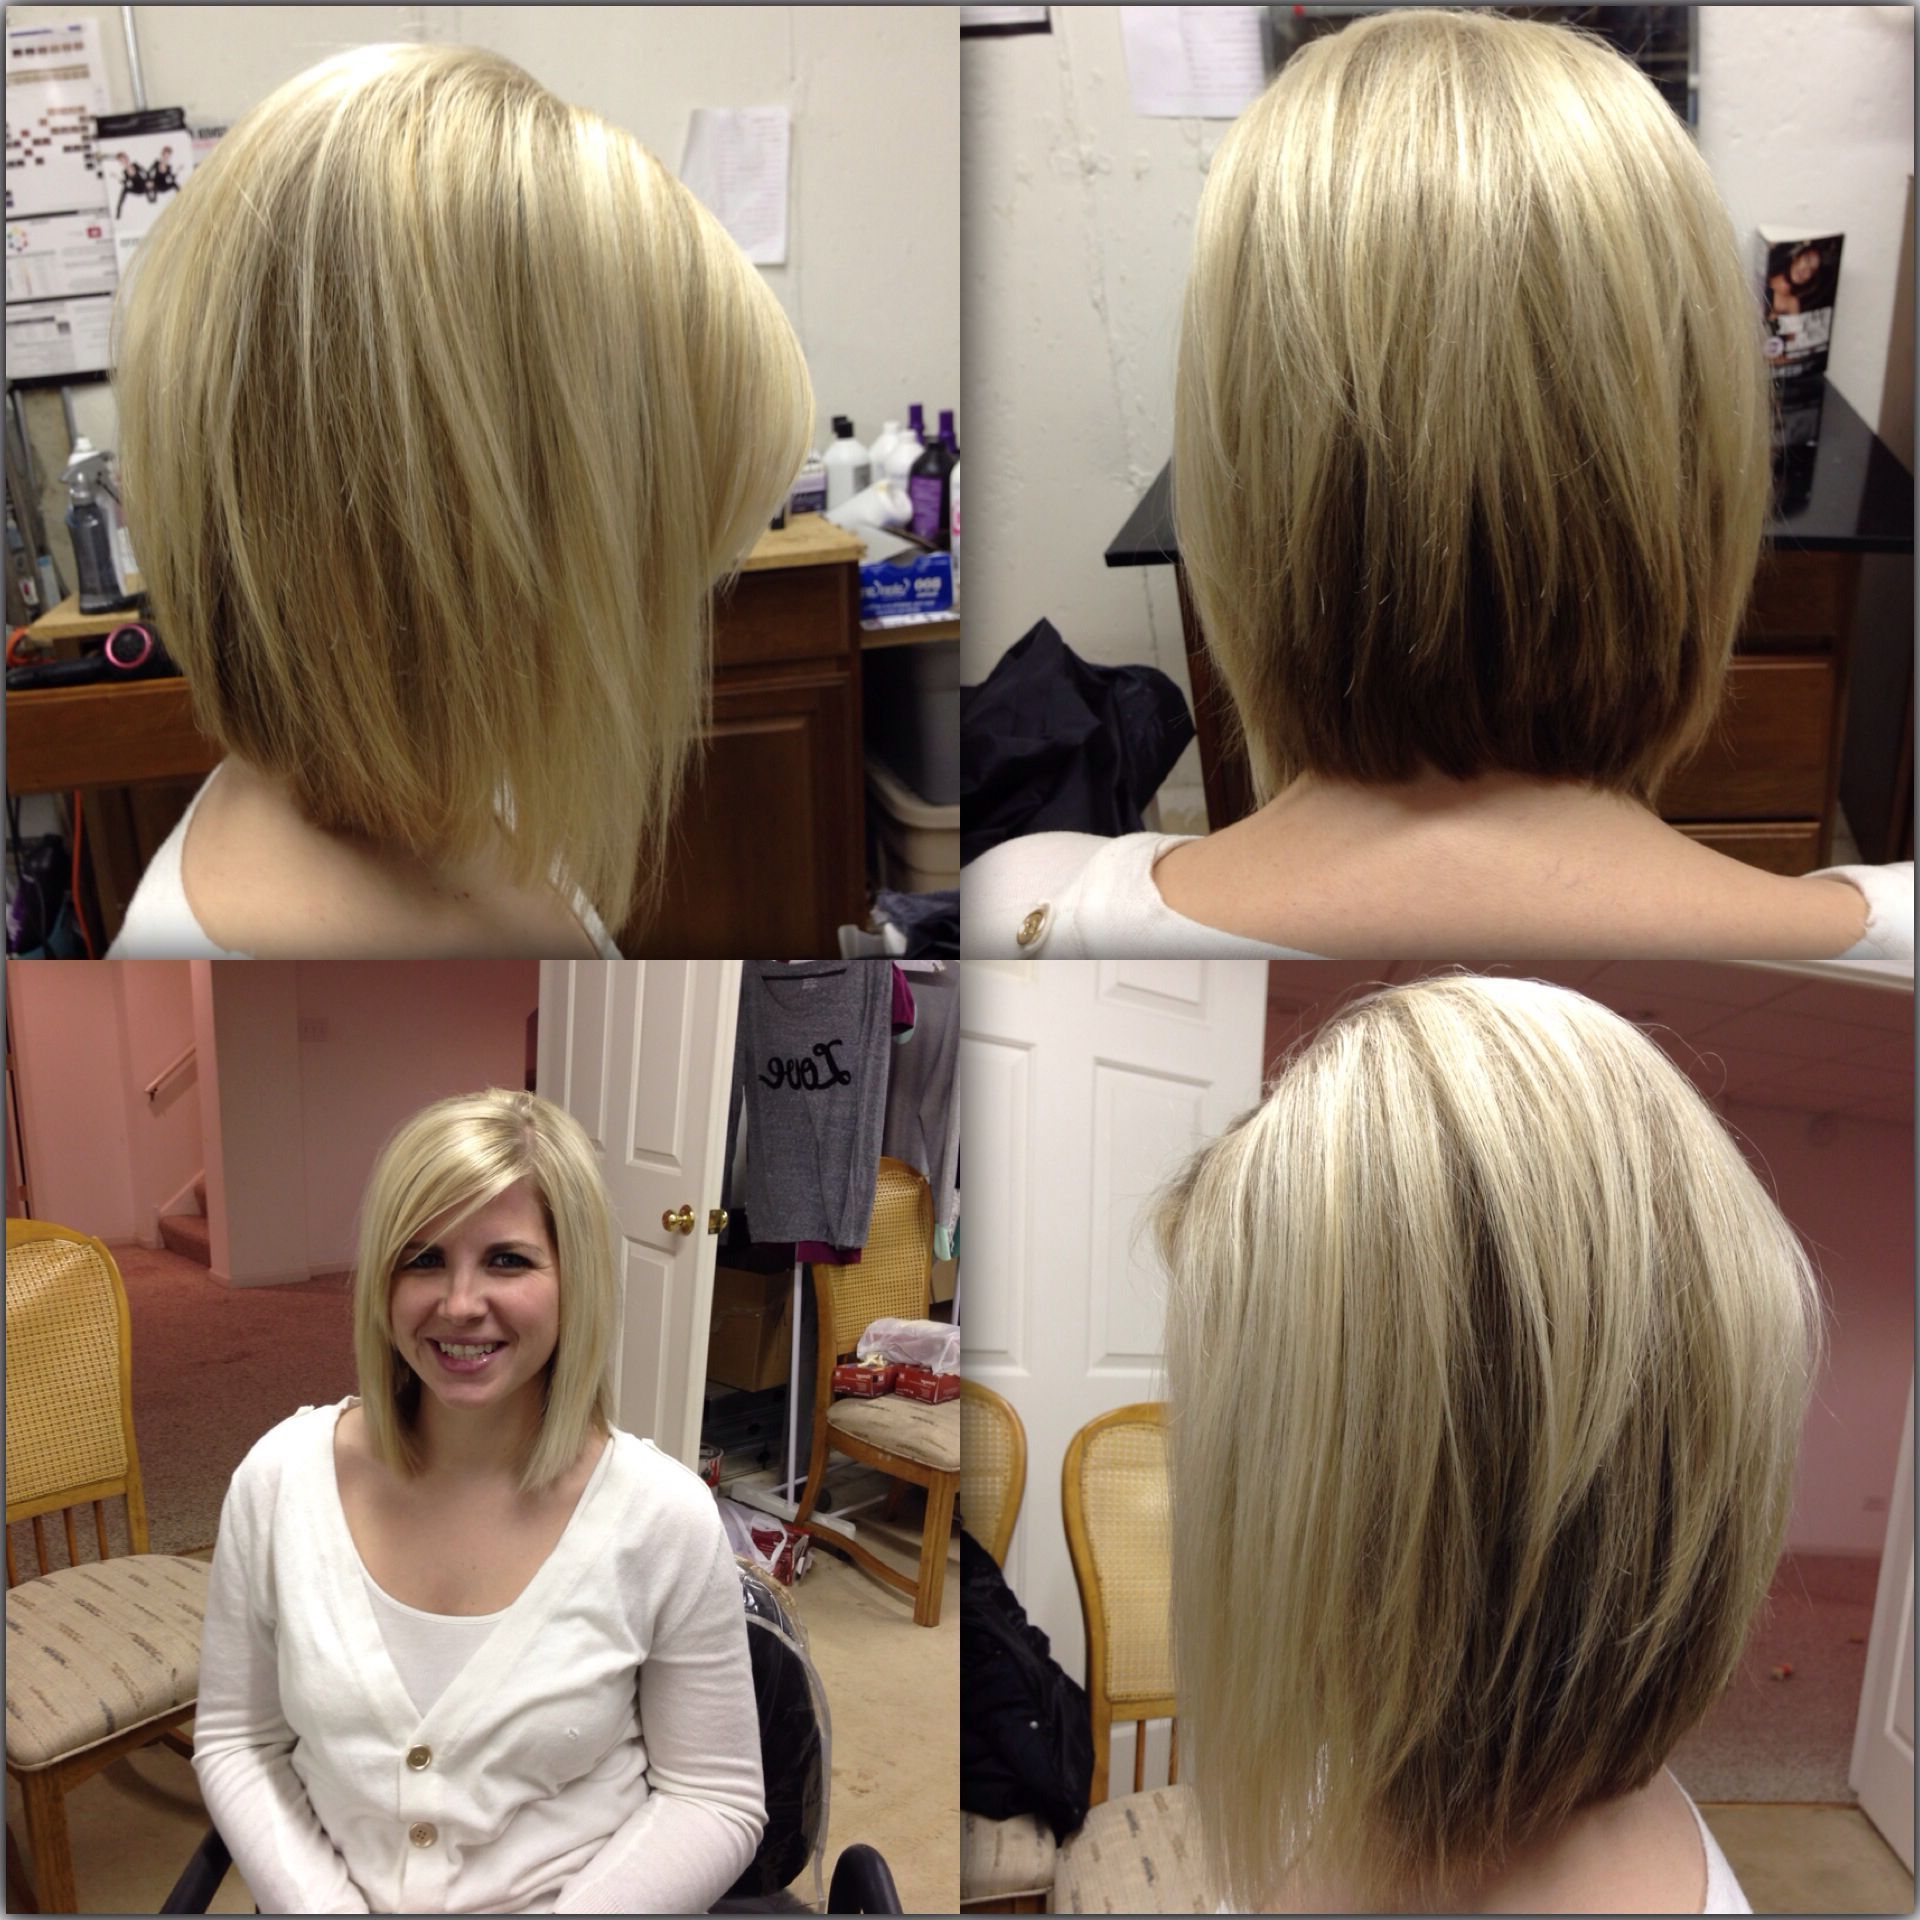 Most Current Razor Cut Medium Hairstyles In Layered Angled Razor Cut Bob With Platinum Blonde Hilites (View 4 of 20)